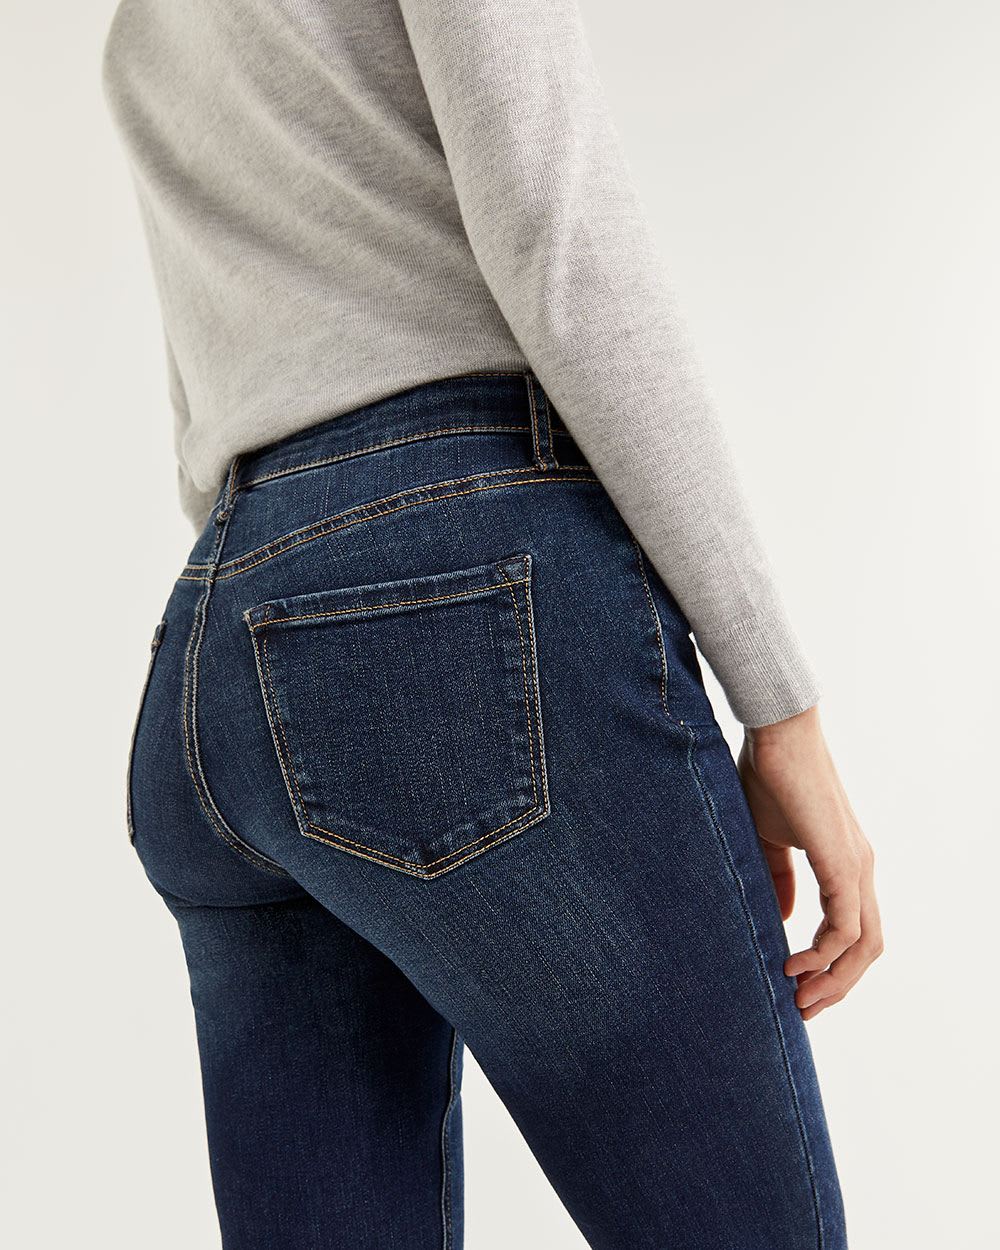 The Insider Straight Jeans - Petite